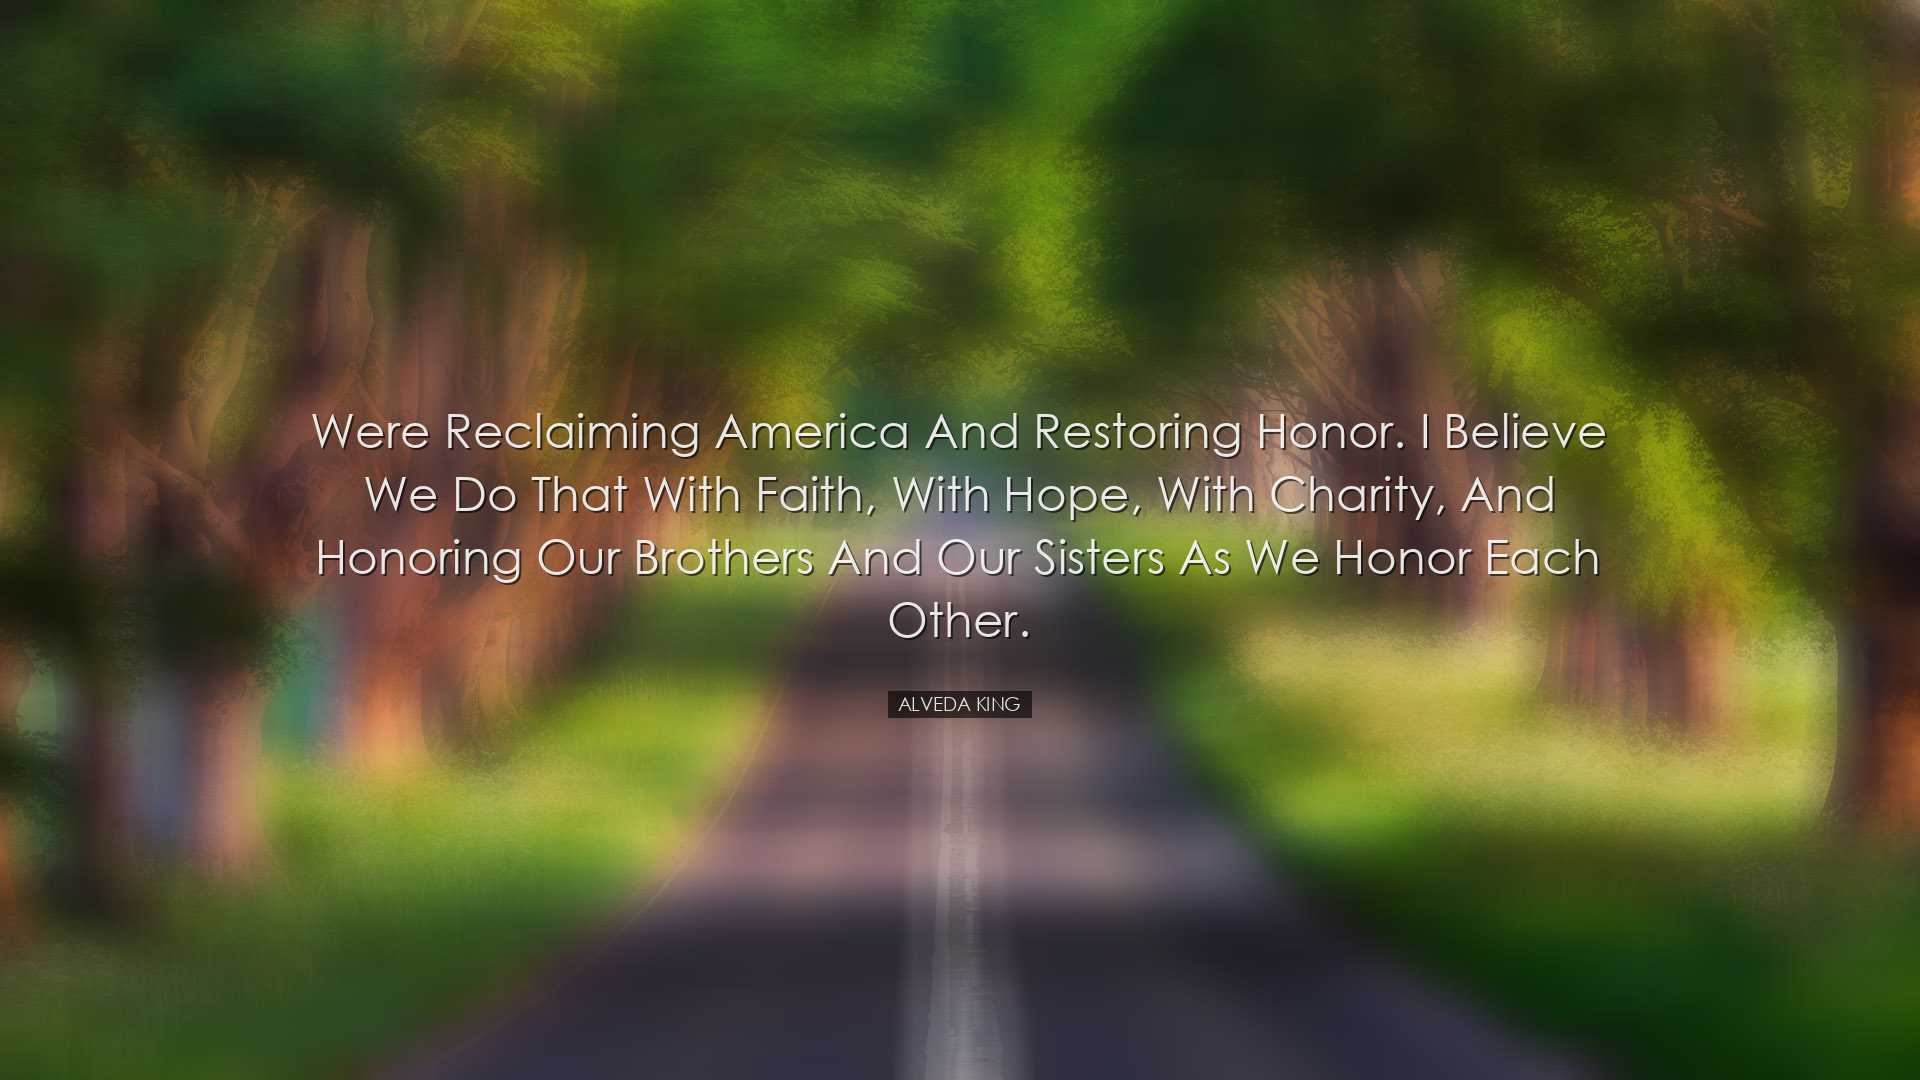 Were reclaiming America and restoring honor. I believe we do that